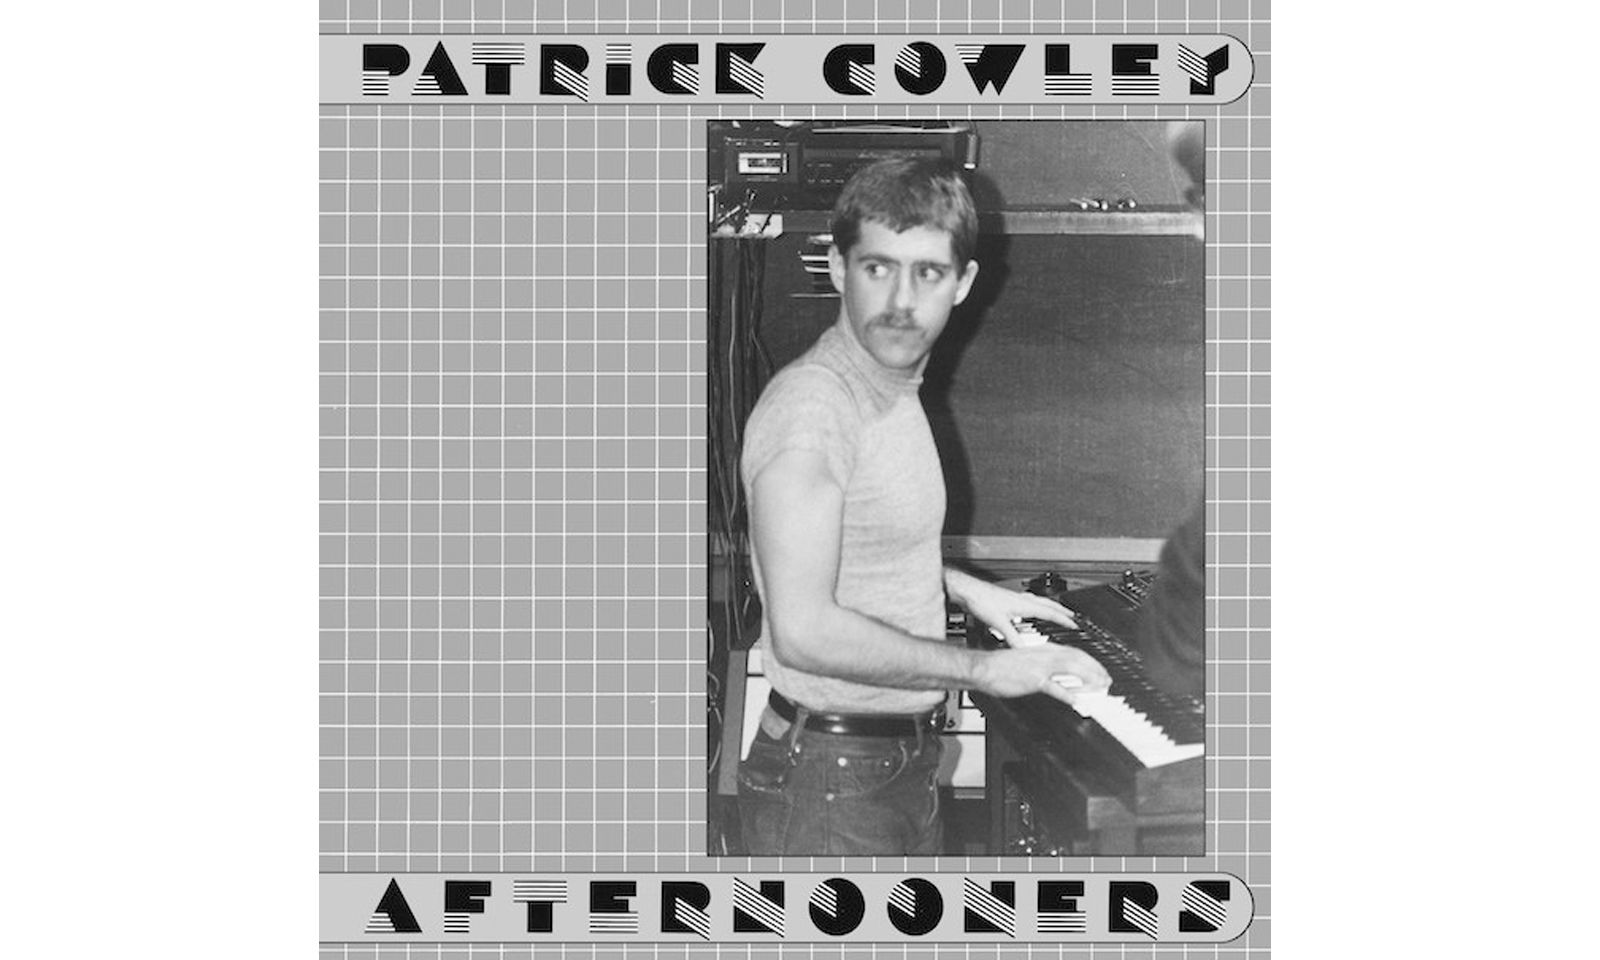 Patrick Cowley’s Final Gay Porn Soundtrack Getting Reissued